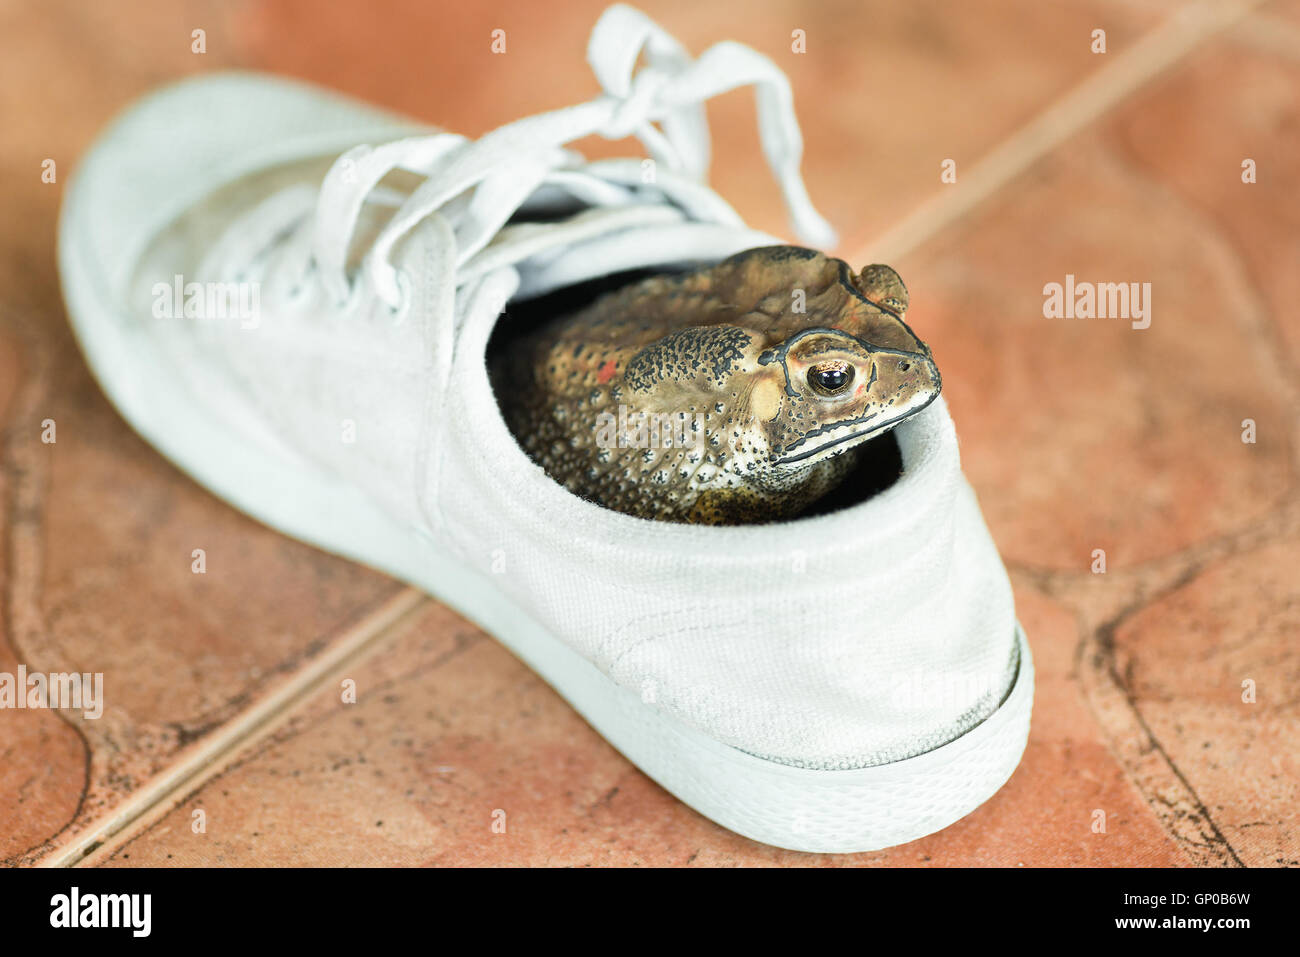 Frog In Shoe High Resolution Stock Photography and Images - Alamy